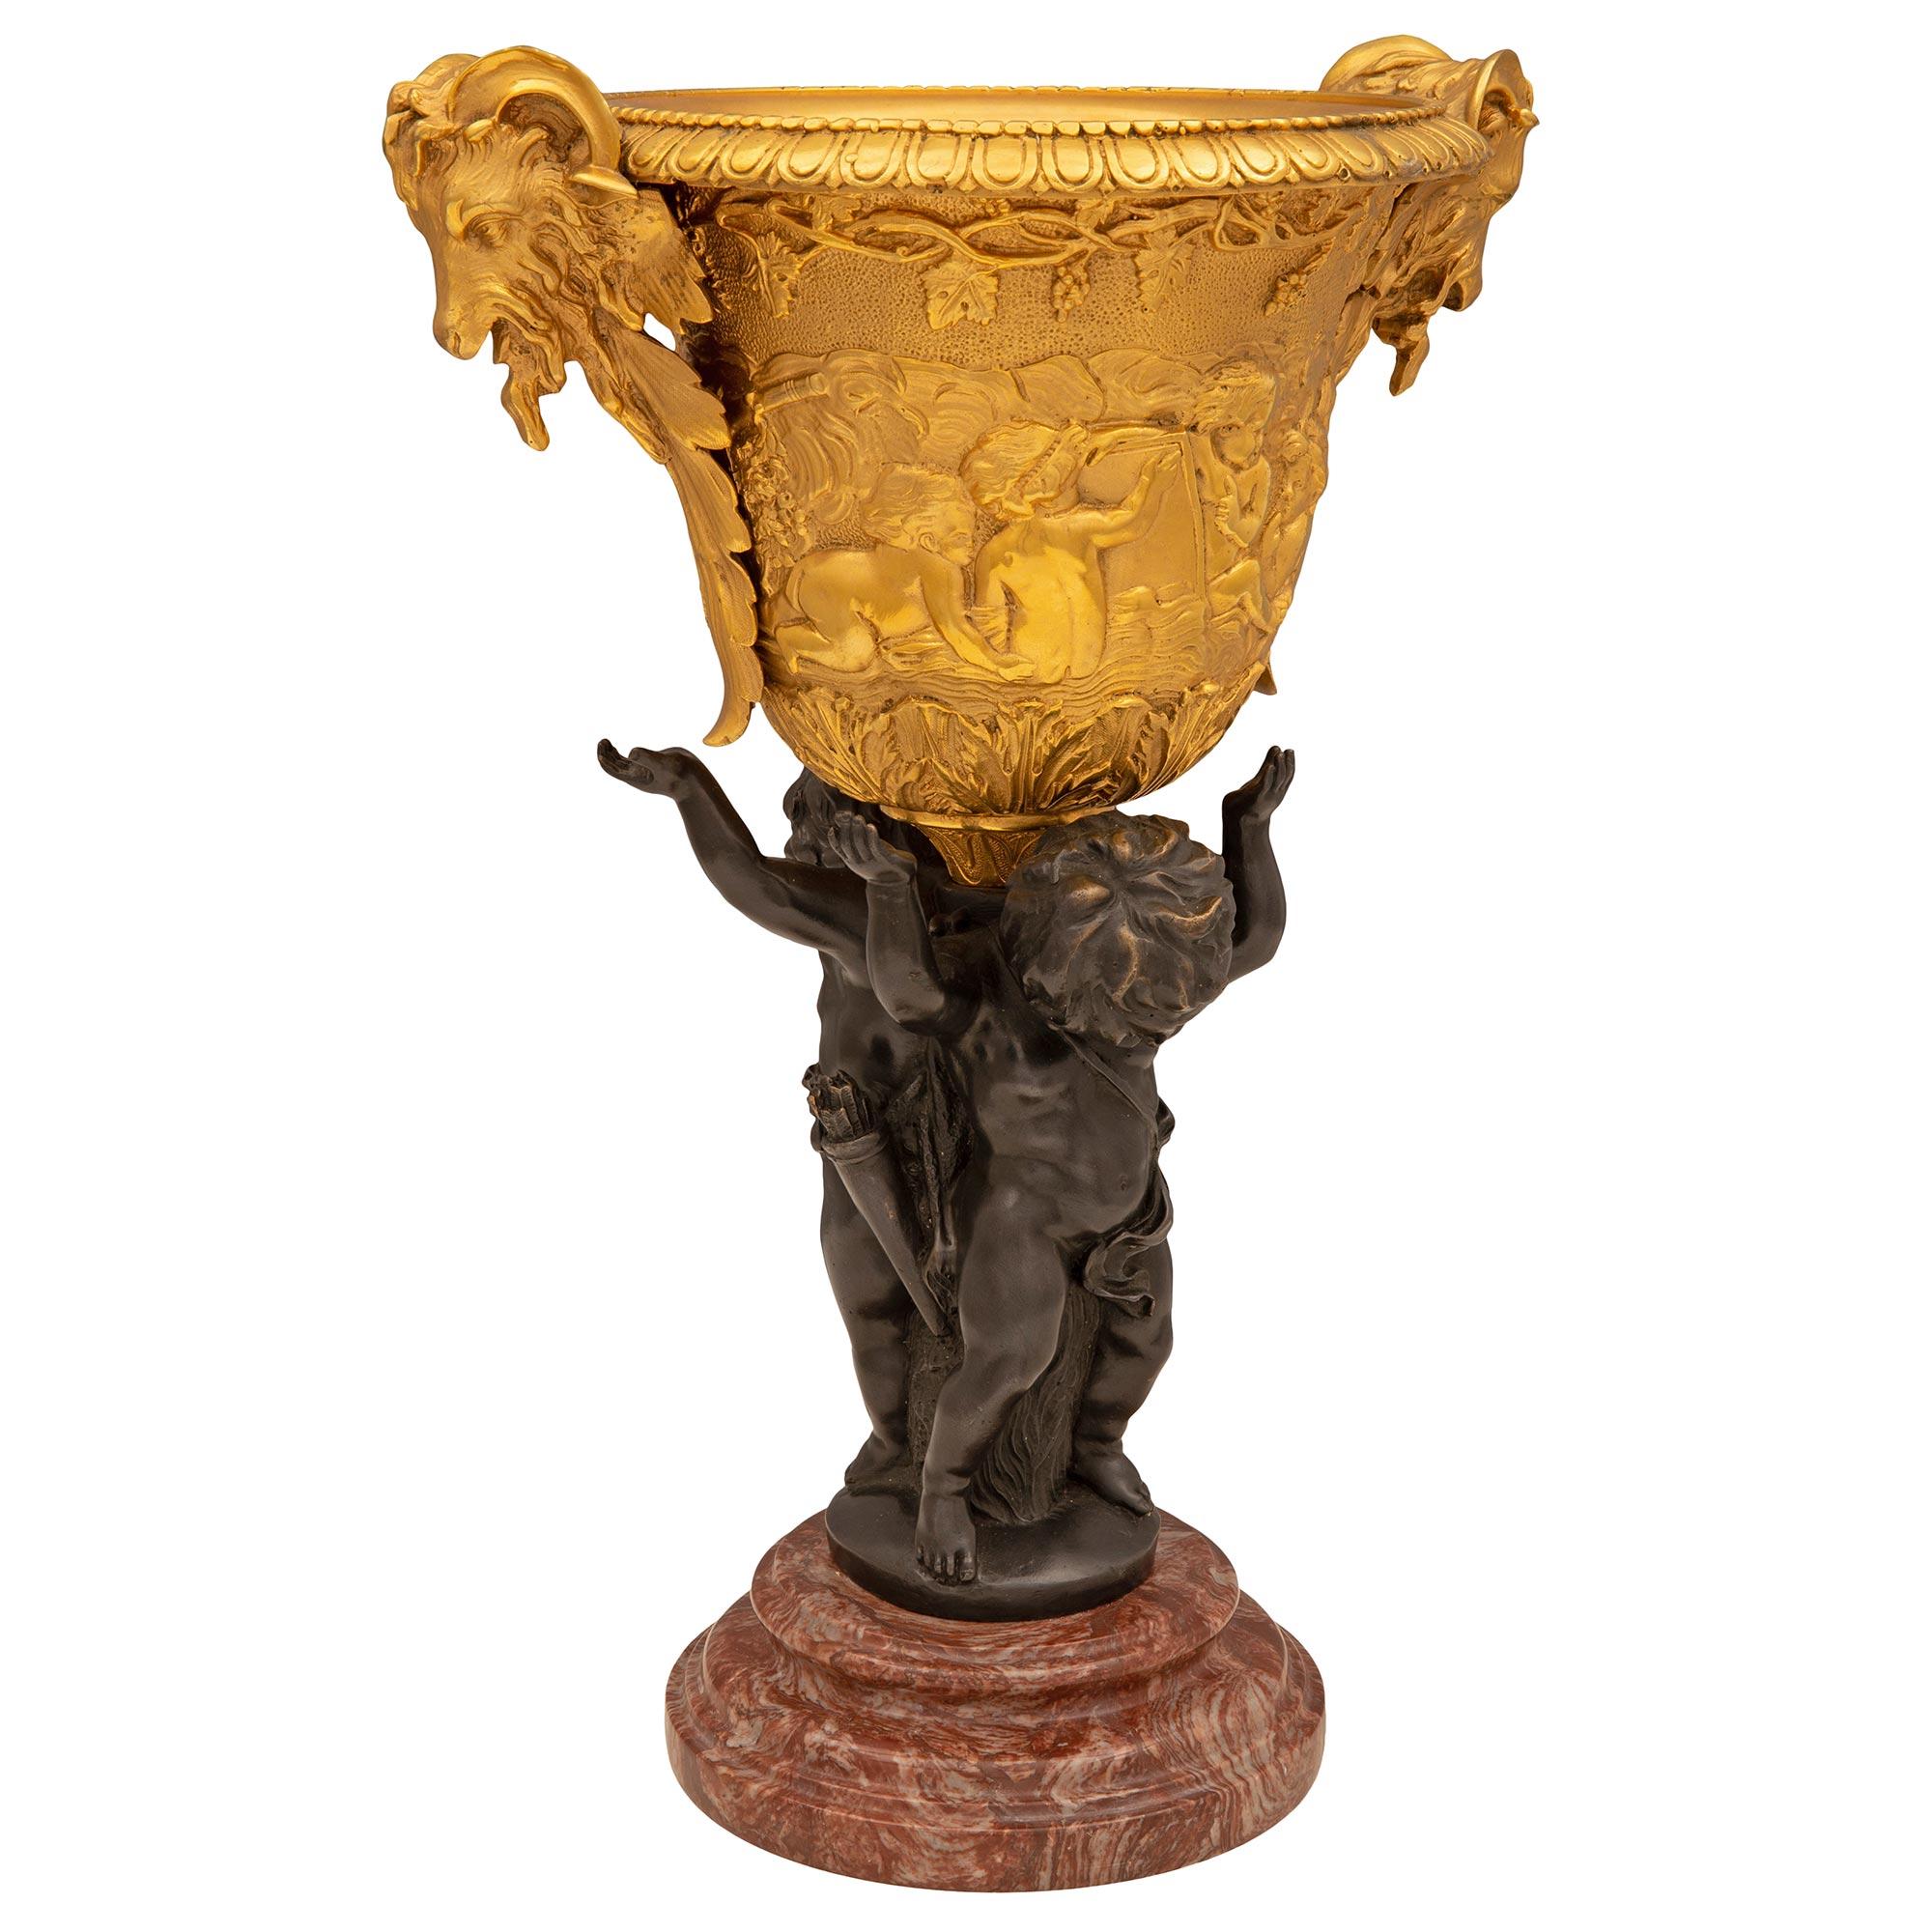 Patinated French 19th Century Louis XVI St. Bronze, Ormolu, and Marble Centerpiece For Sale